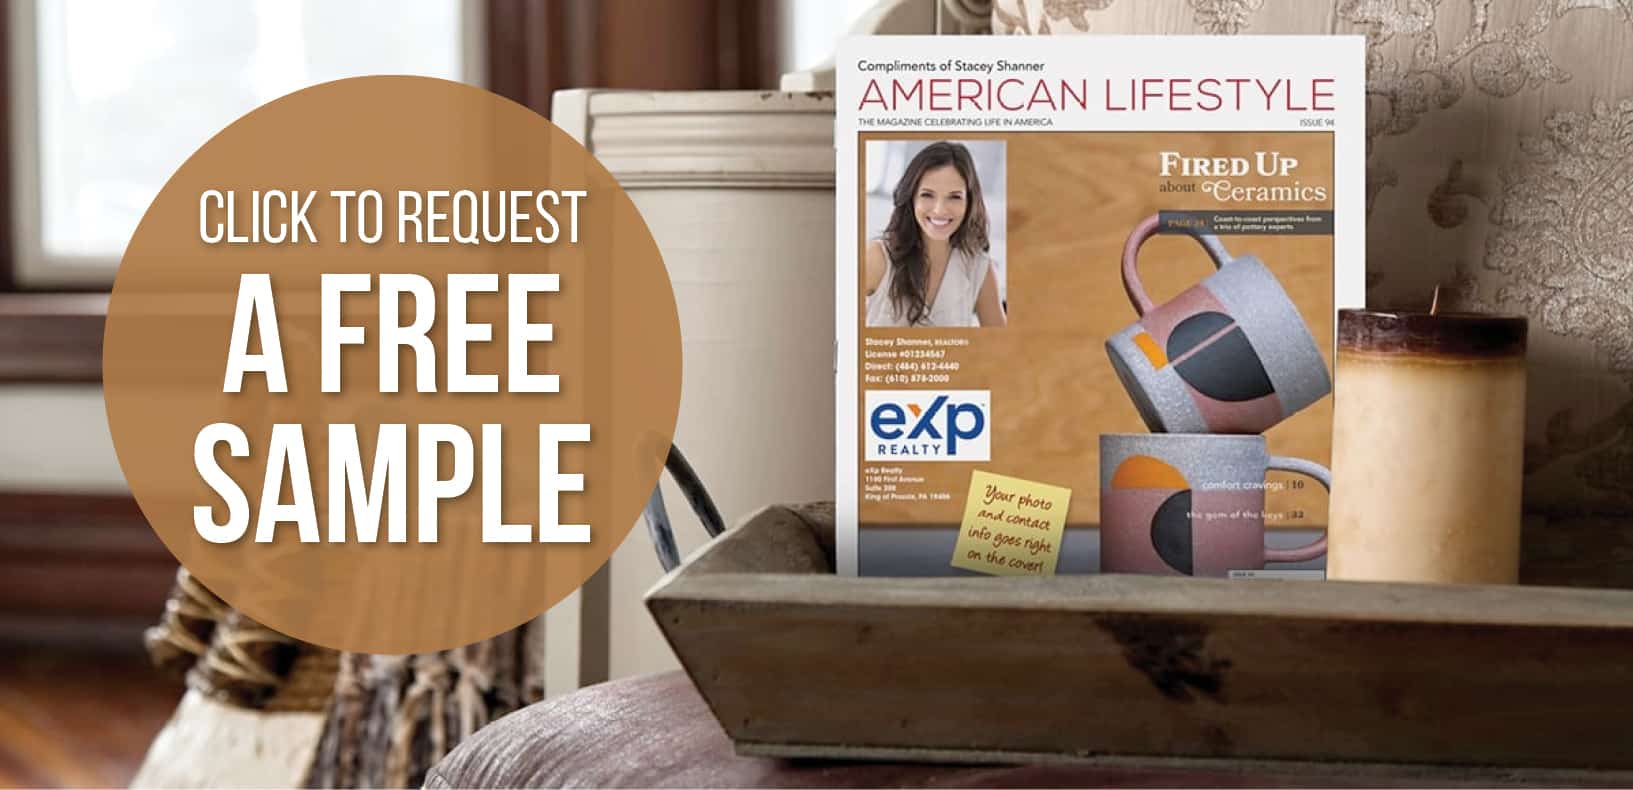 American Lifestyle magazine cover cover featuring eXp Realty